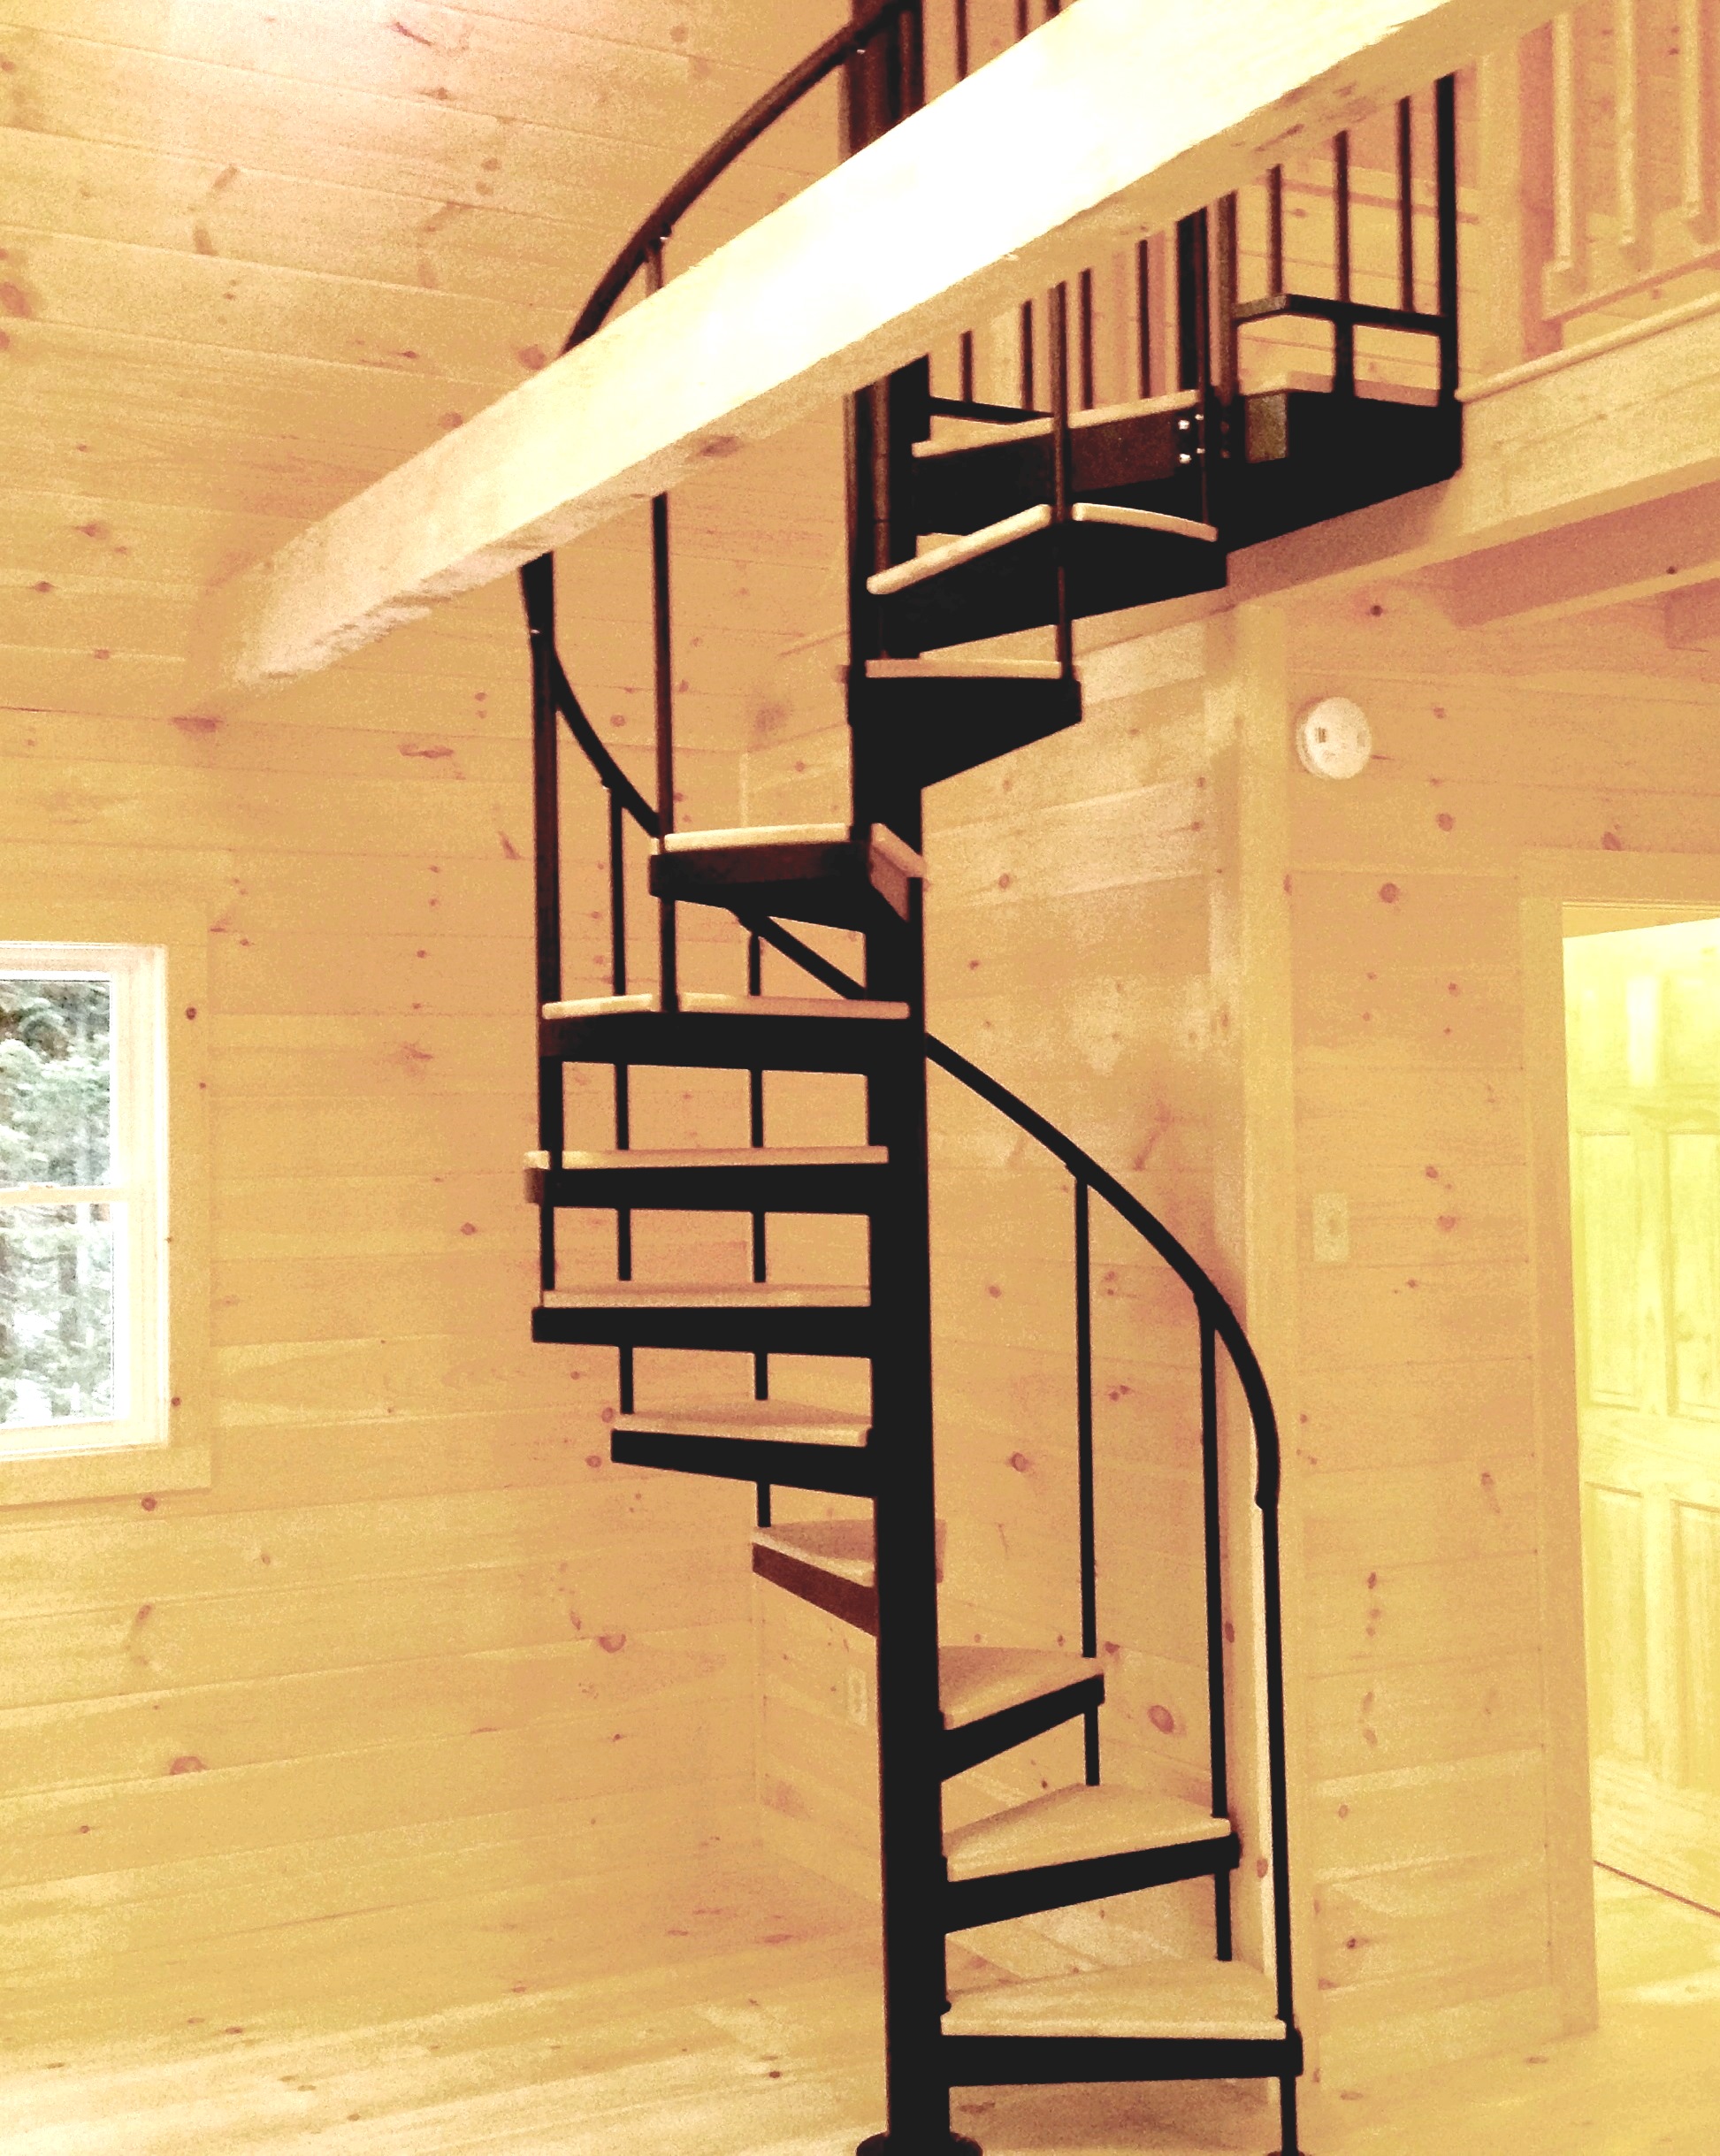 5 Tips for Designing Your Own Tiny House - Salter Spiral Stair